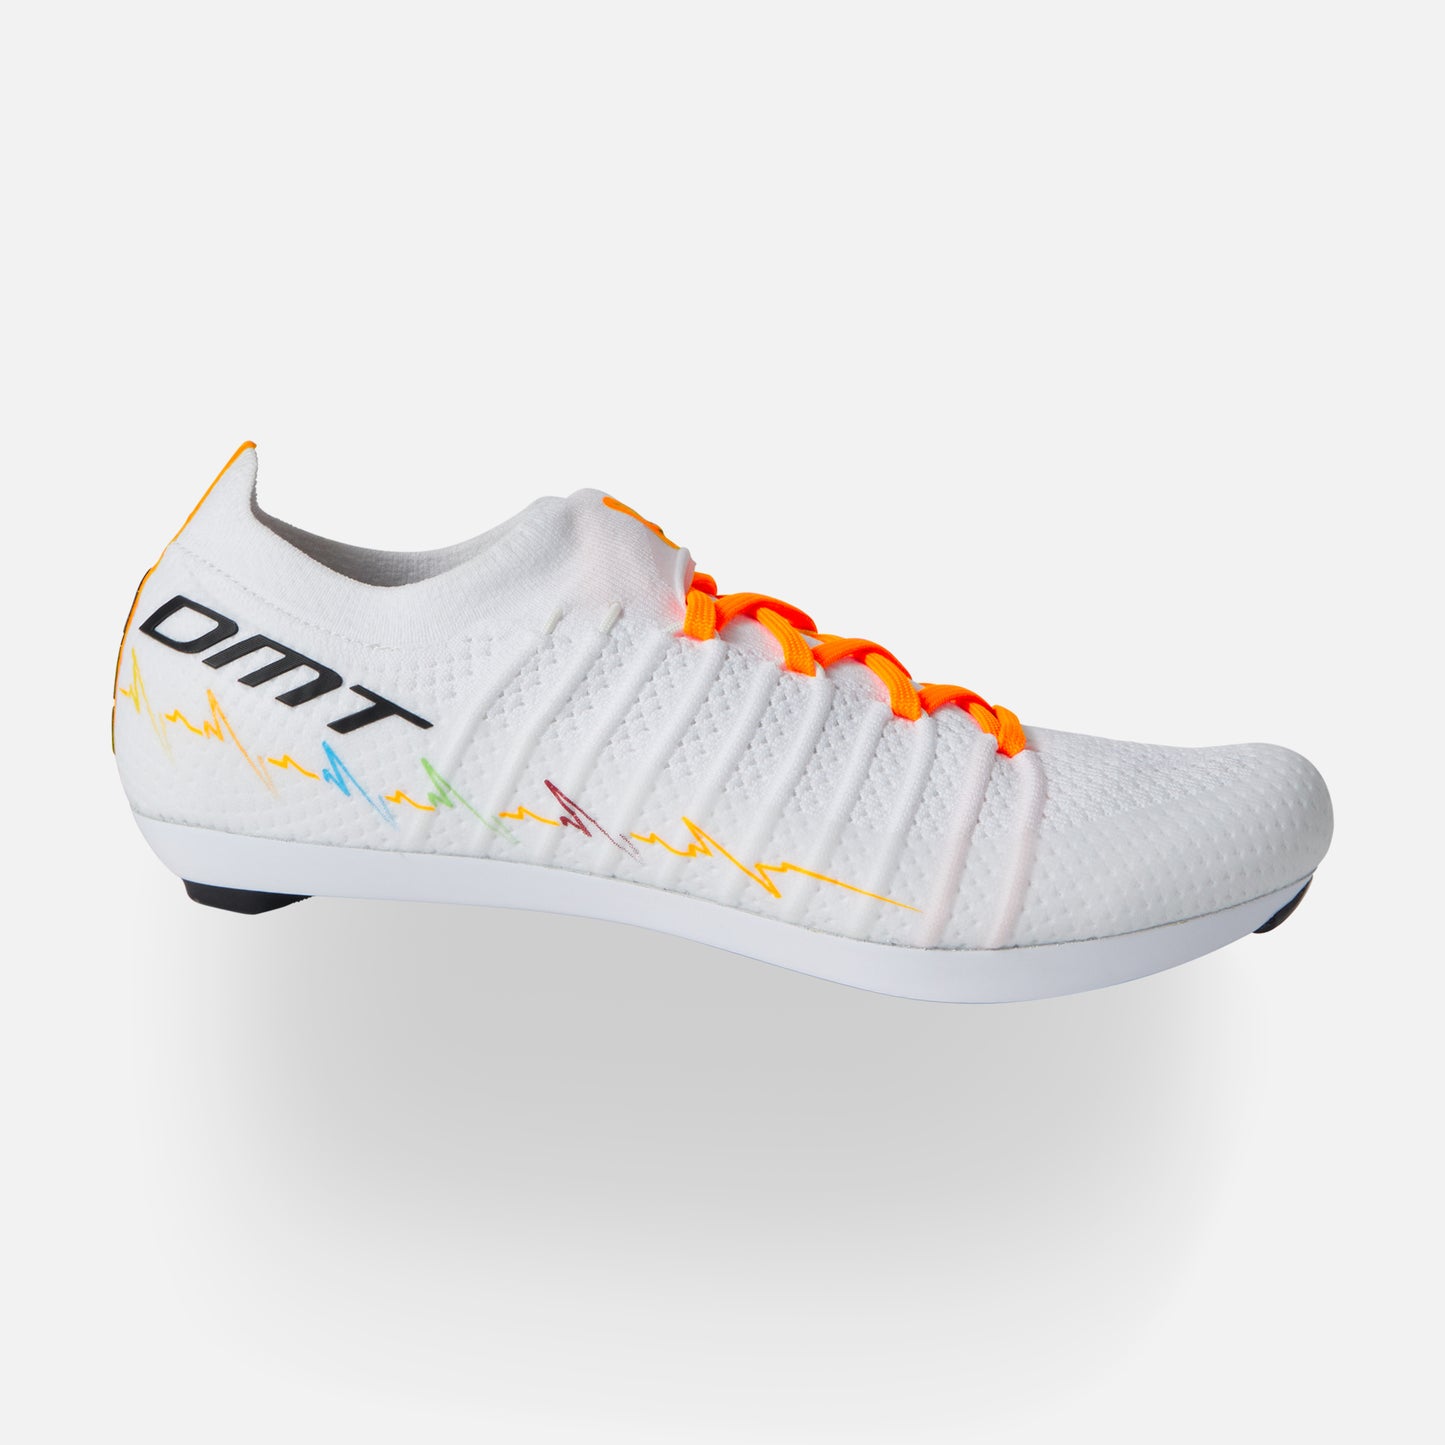 All carbon bike shoes: view all - DMT Cycling